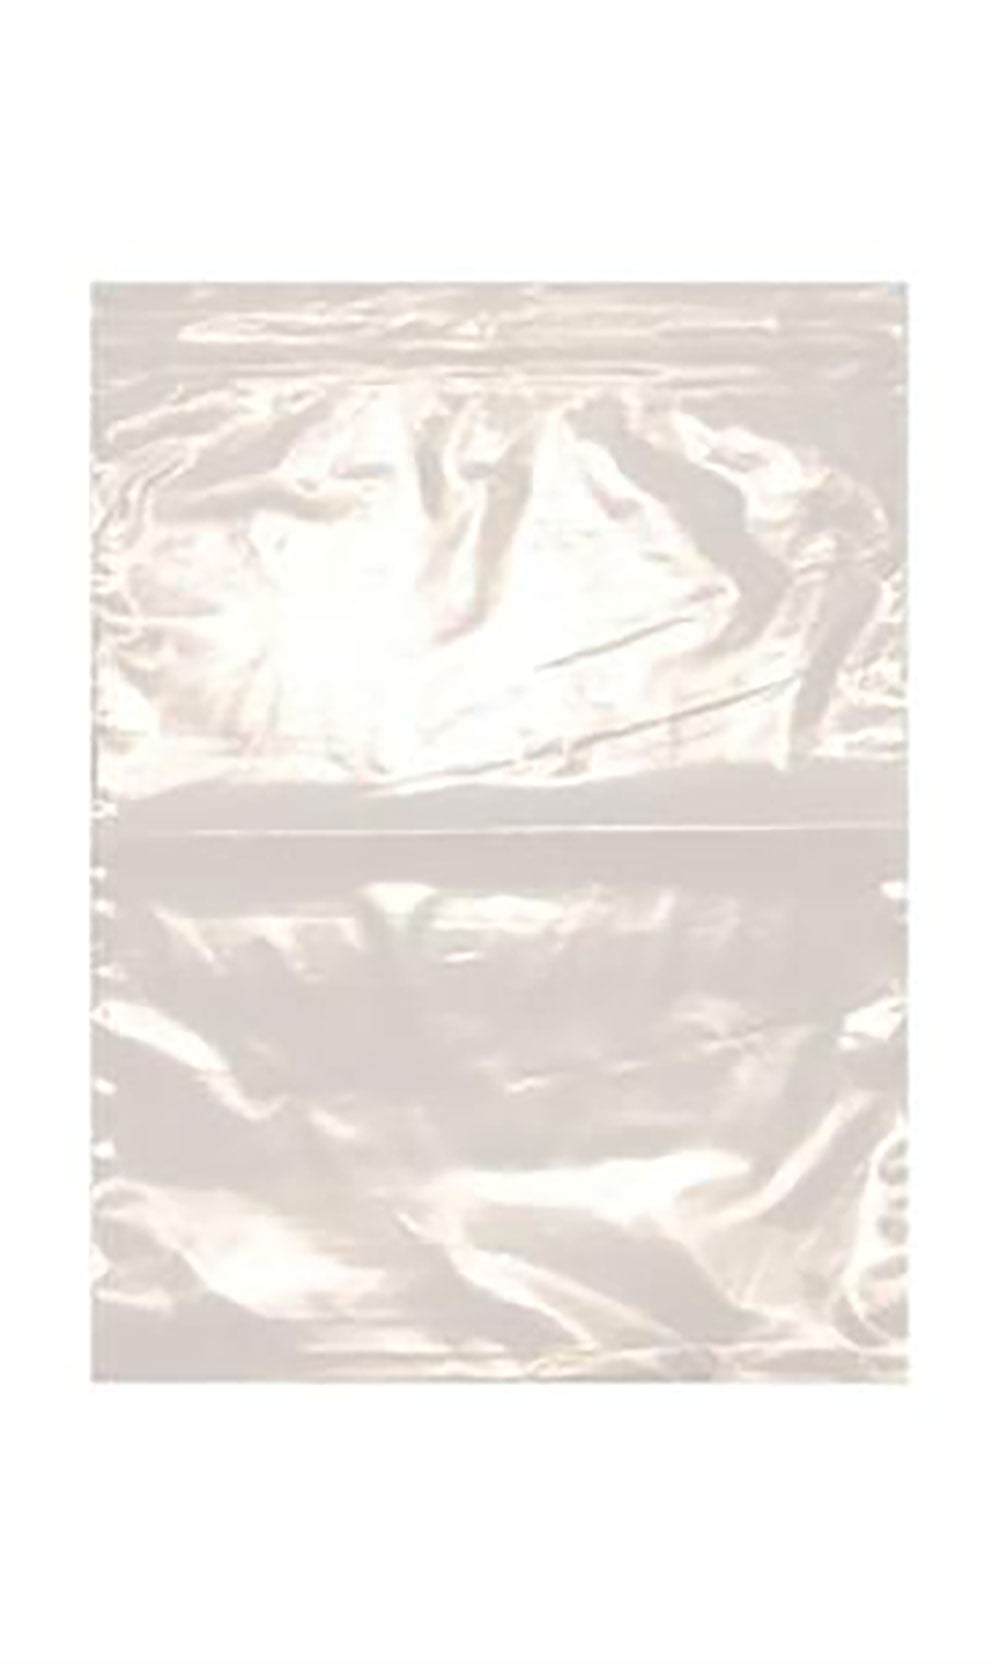 40mm x 40mm Small Clear Poly Plastic Grip Seal Resealable Bag Trendy x 1000 pcs 